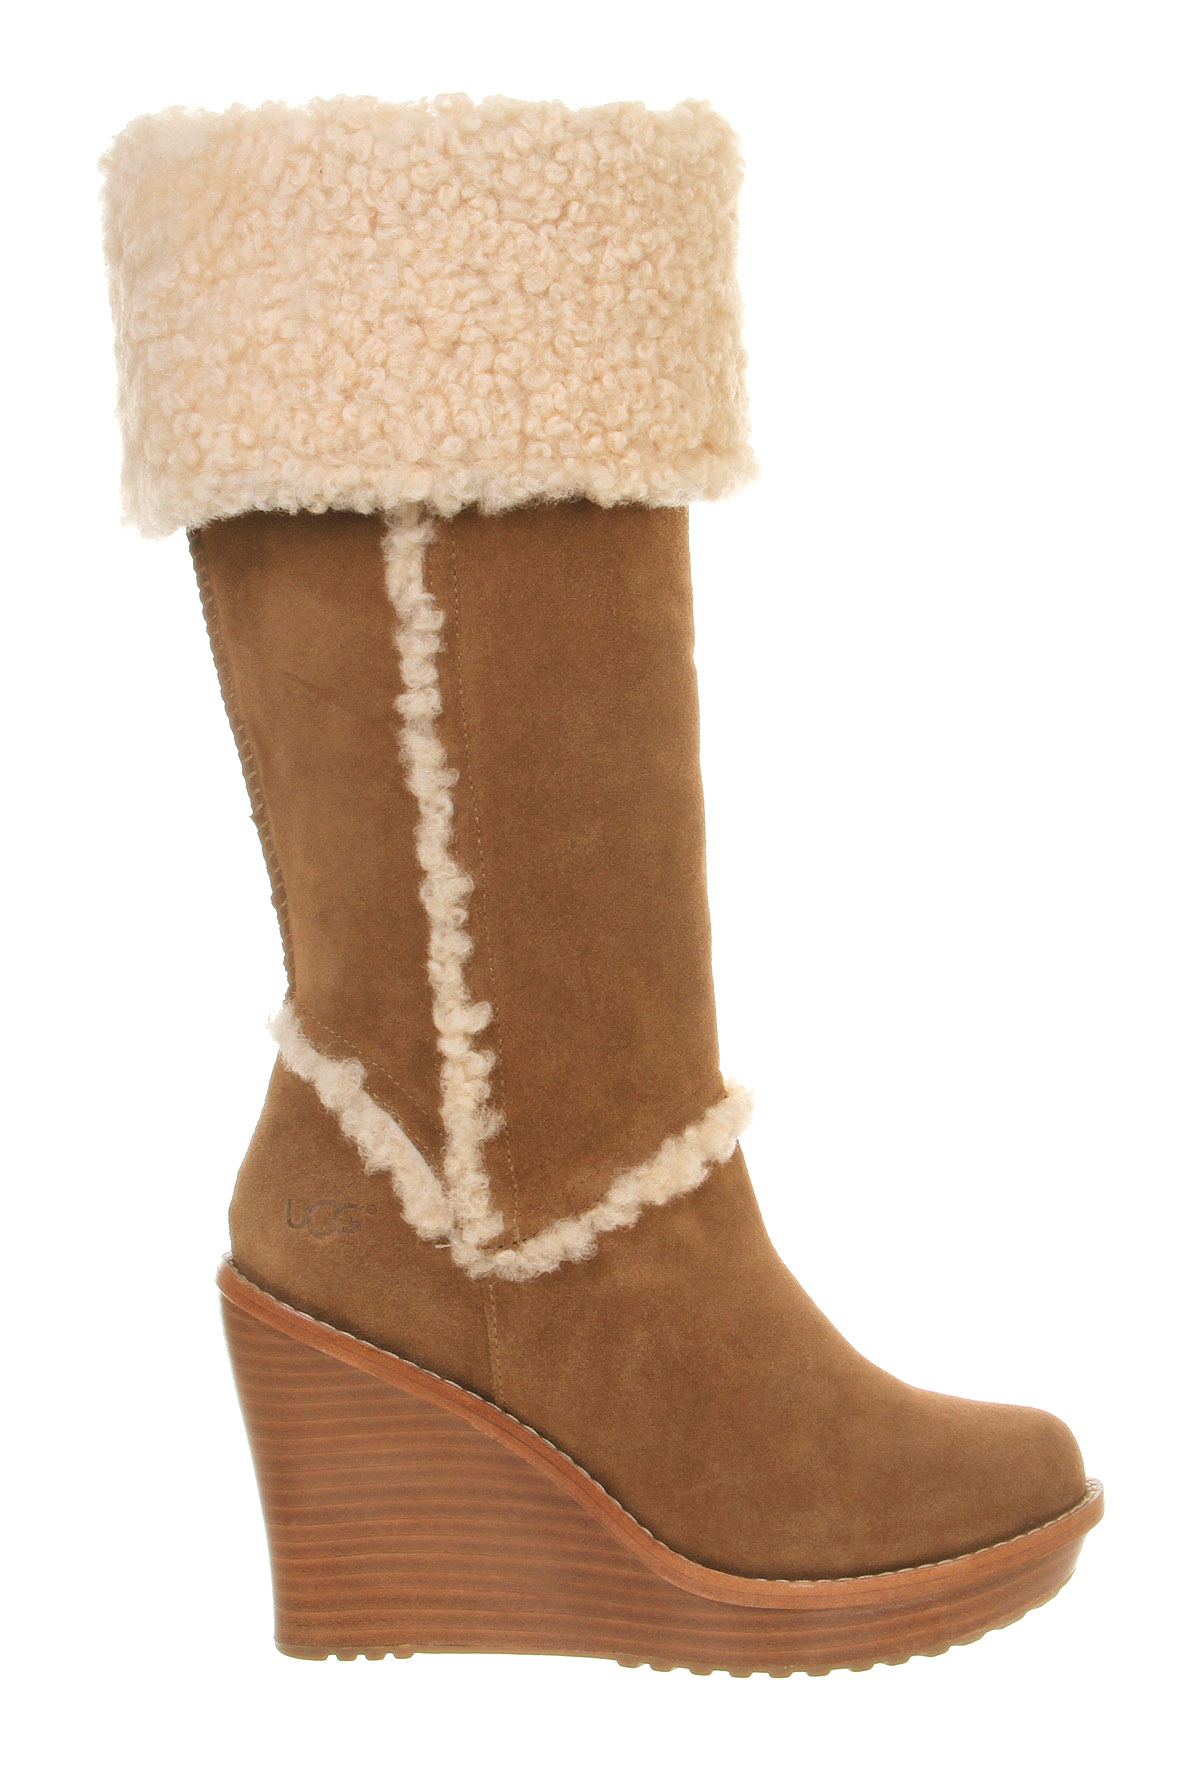 UGG Aubrie Wedge Shearling Knee Boots in Chestnut (Brown) - Lyst